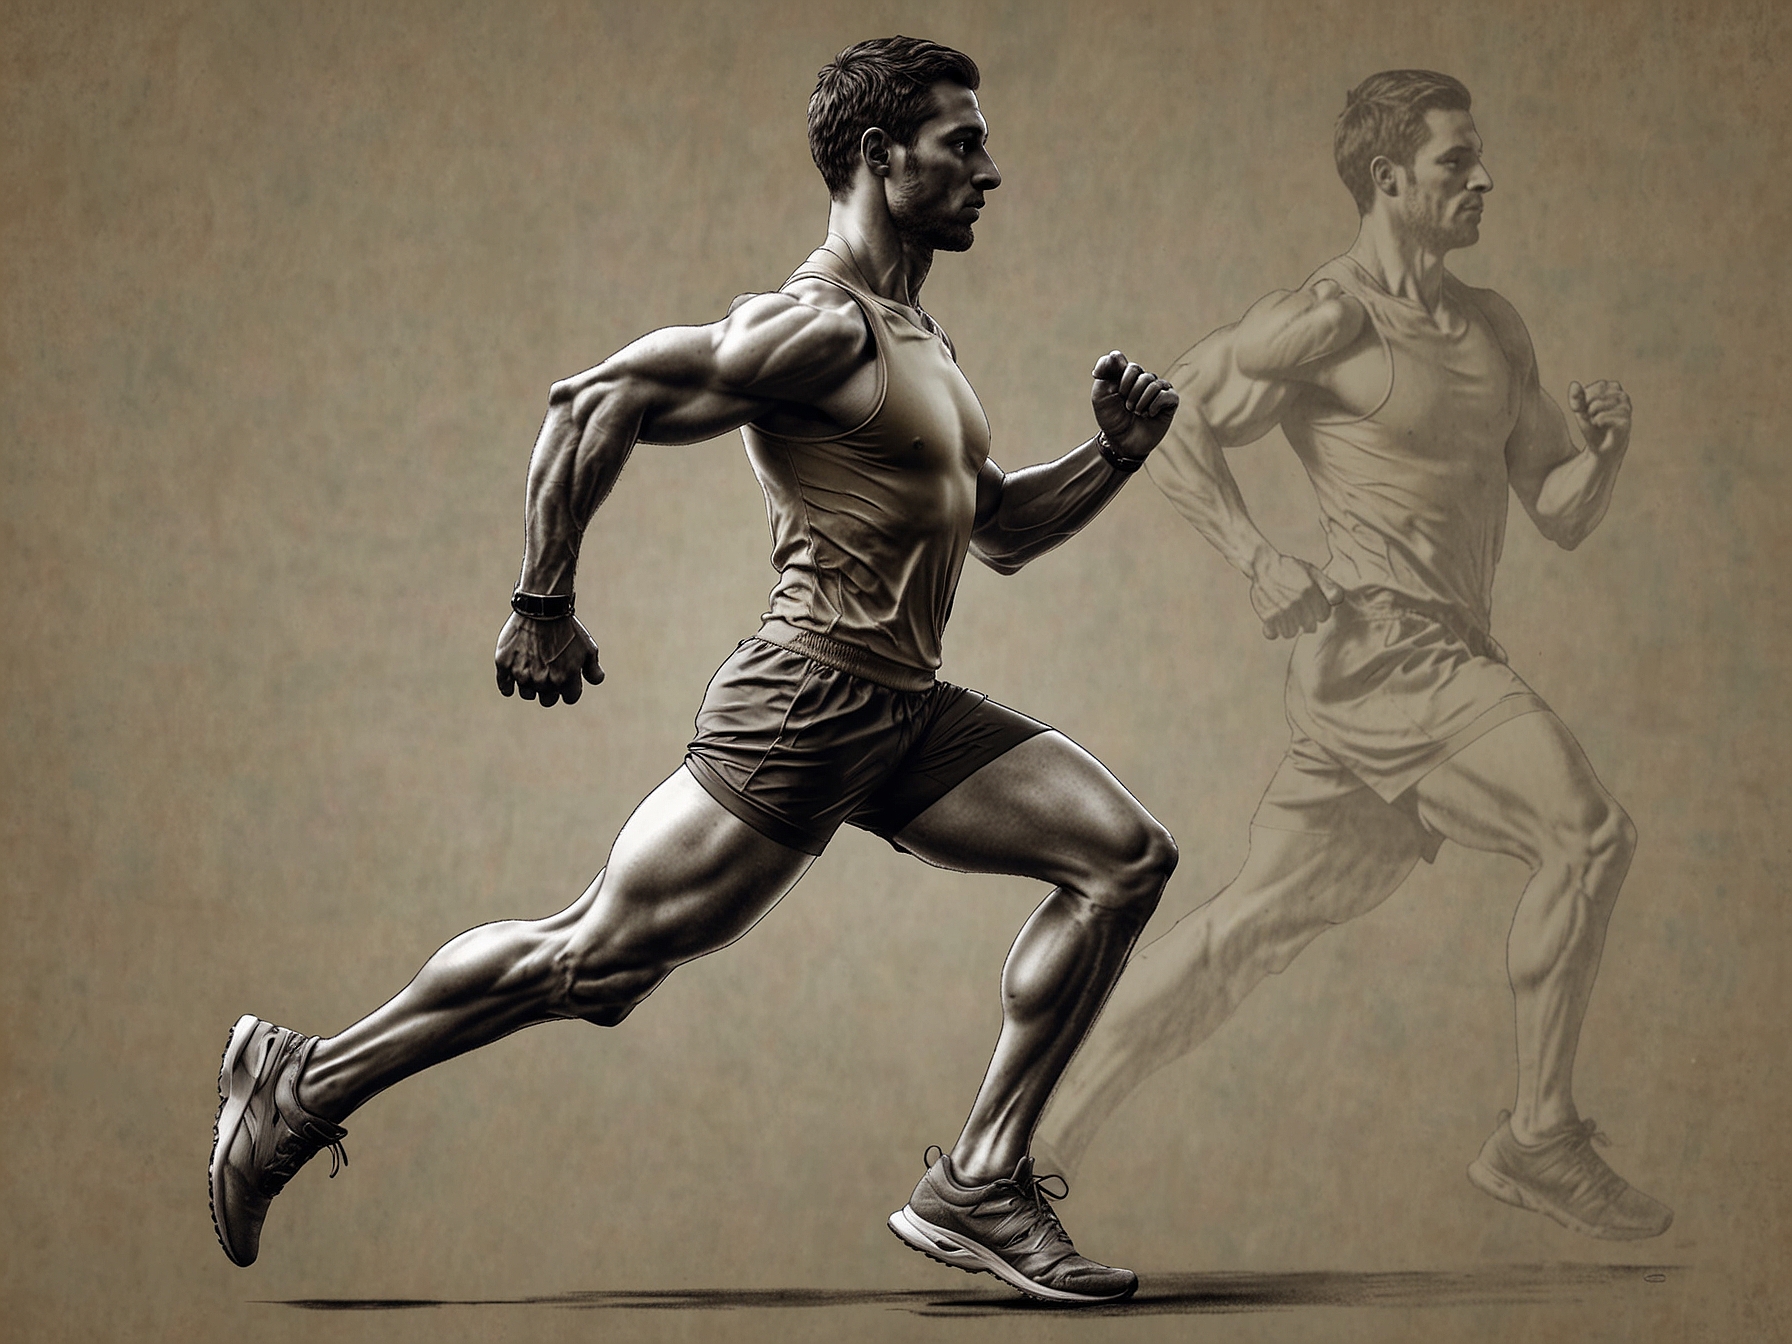 An illustration of a runner maintaining an upright posture with head aligned with the spine and gaze forward, showcasing the importance of optimal body alignment for efficient running.